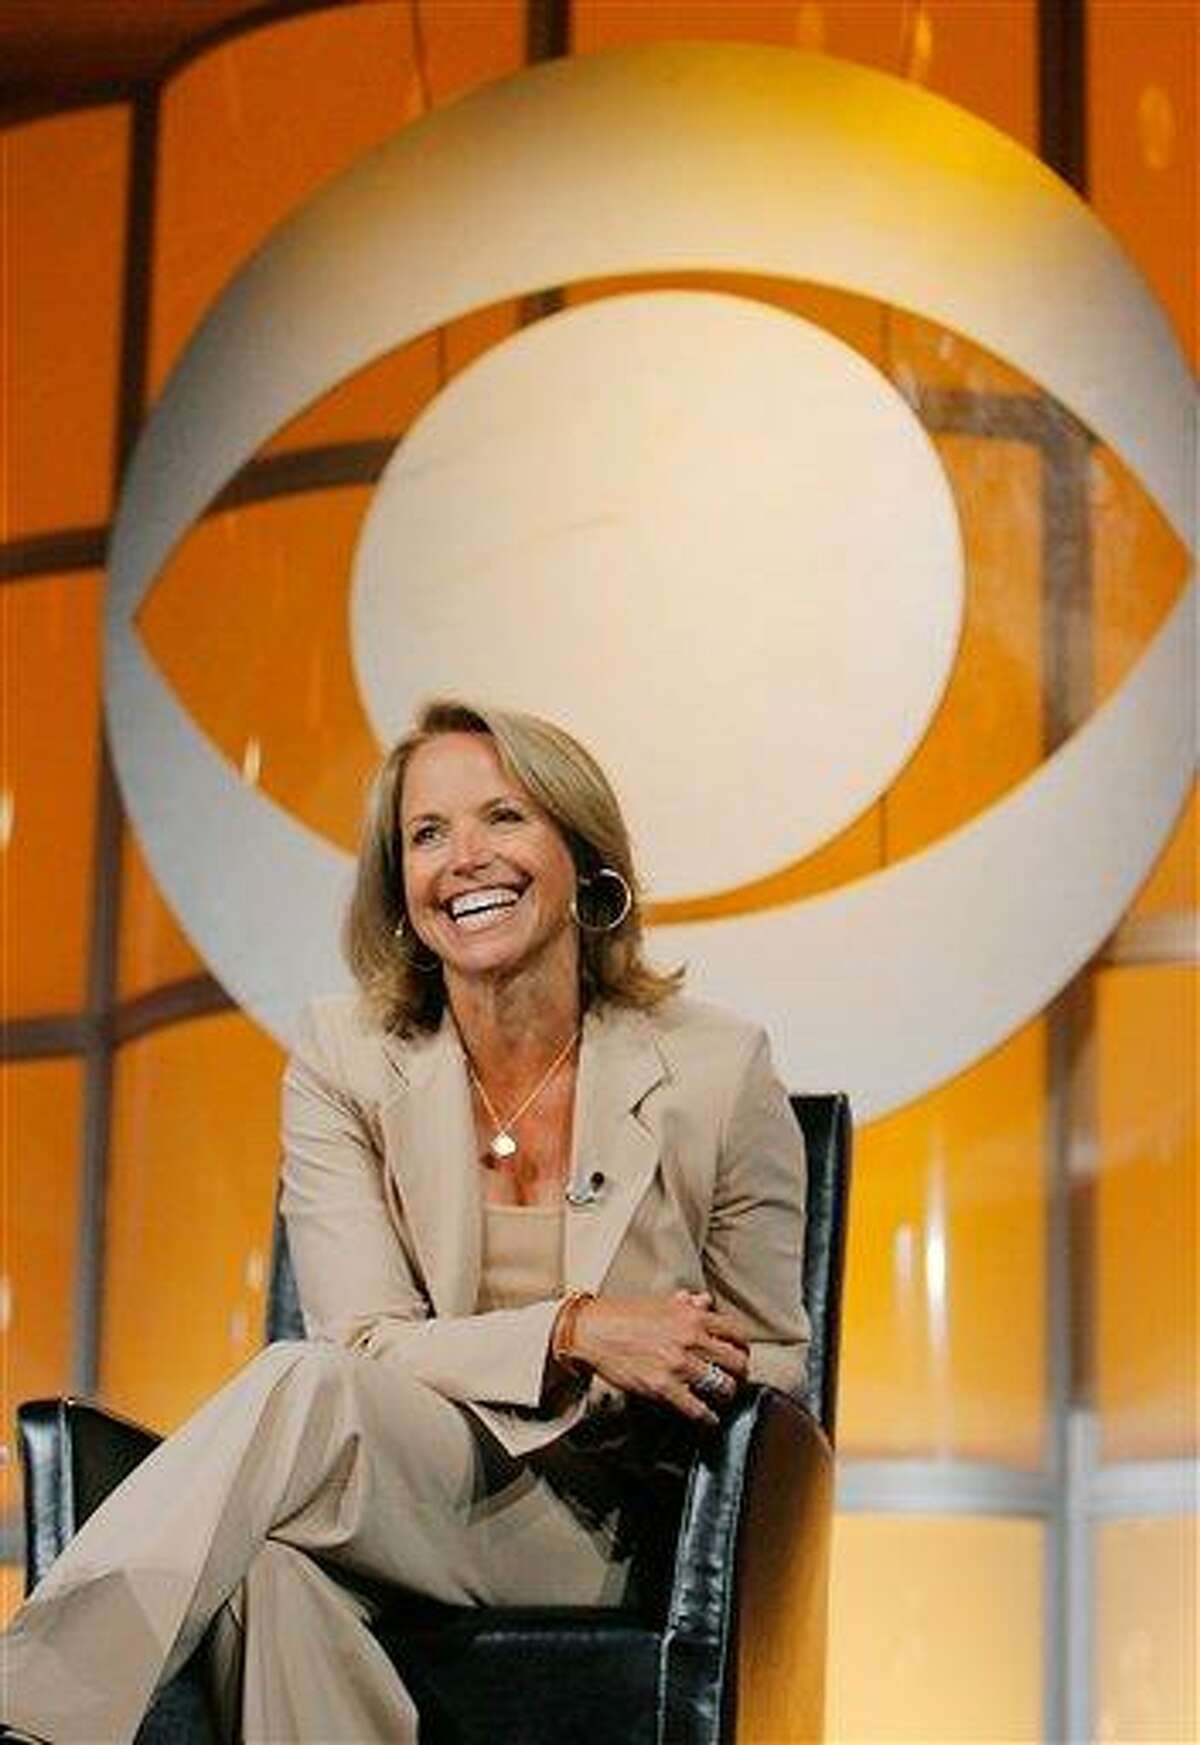 FILE - In this July 16, 2006 file photo, Katie Couric, CBS News anchor and correspondent, answers questions about her upcoming season anchoring "CBS Evening News with Katie Couric" during a news conference in Pasadena, Calif. (AP Photo/Lucas Jackson, File)